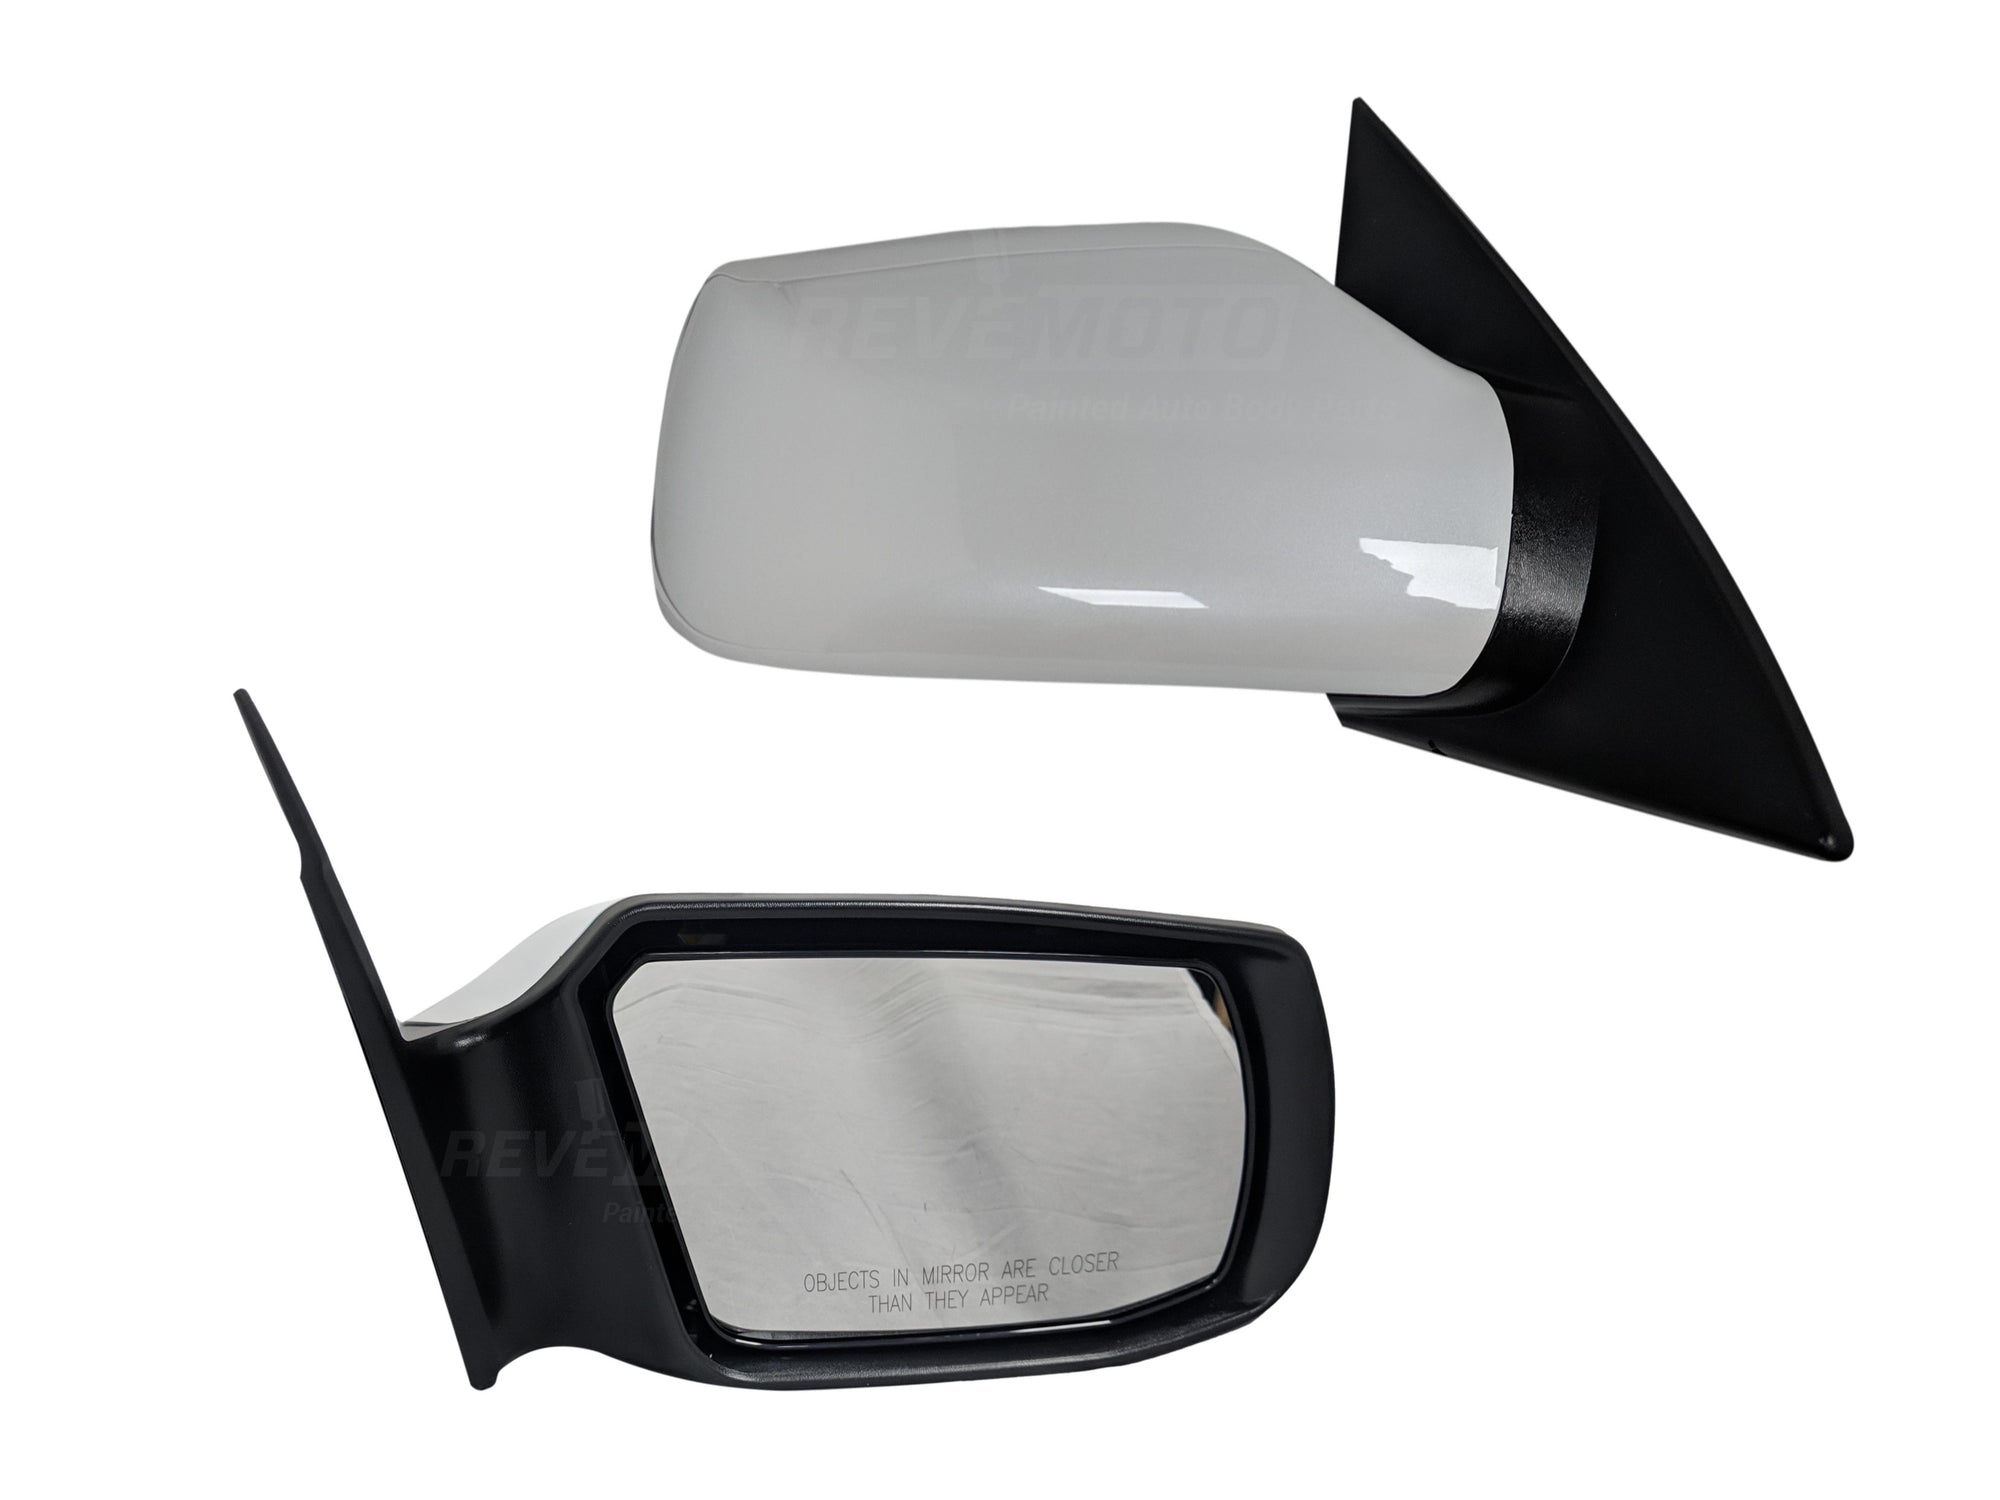 2010 Nissan Altima Passenger Side View Mirror, Without Heated Glass, Without Signal Lamp, 2.5 Liter, Sedan, 4 Door, PaintedSatin White Pearl (QX3) 96301JA04A NI1321163